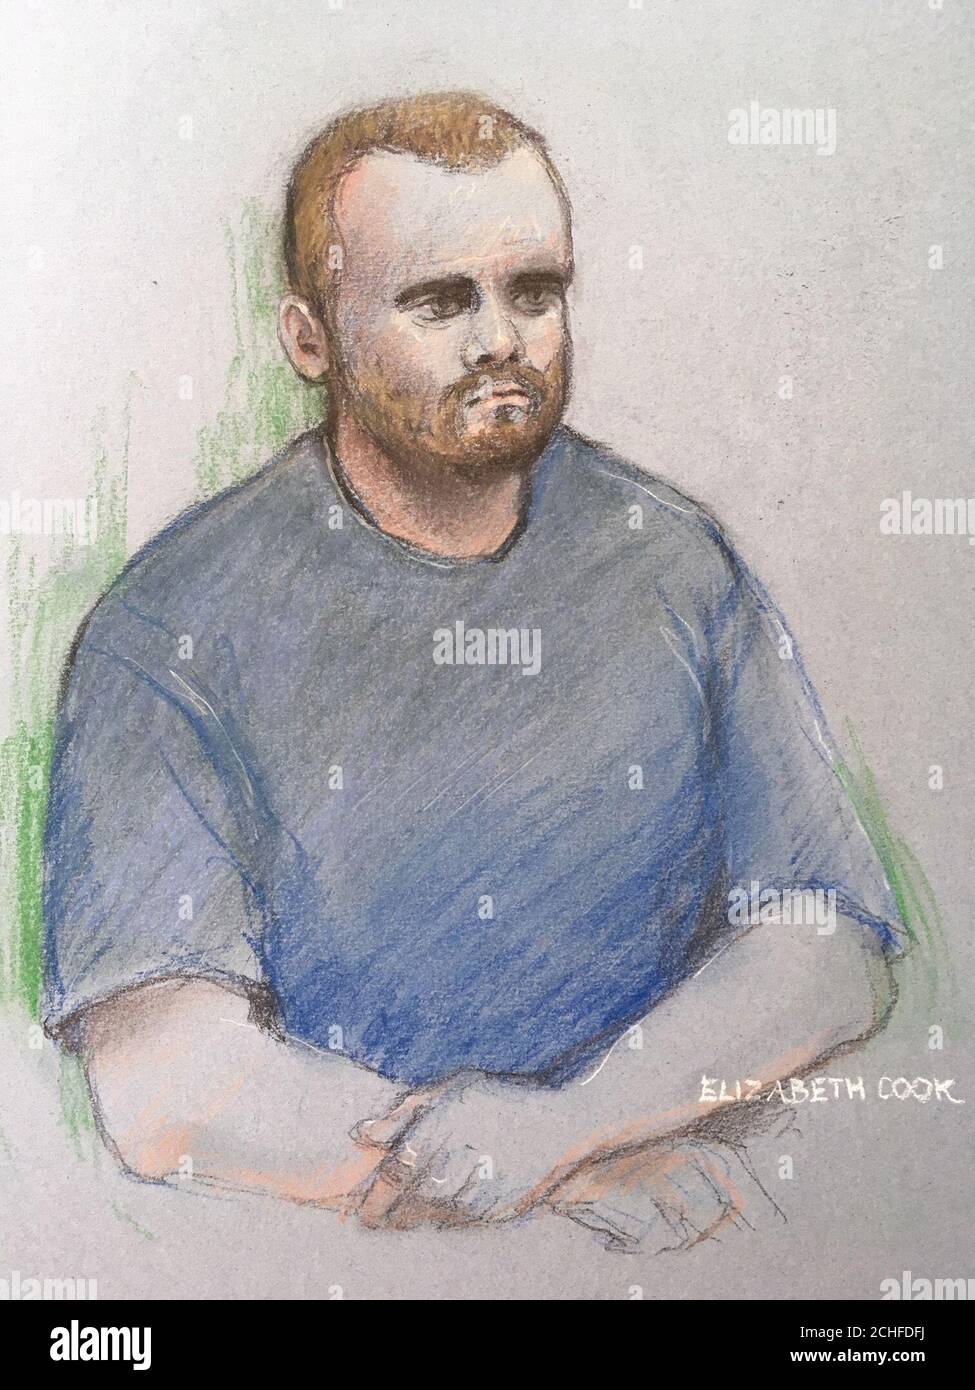 Jonty Bravery appearing at the Old Bailey in London. The teenage suspect accused of throwing a young French boy from the viewing platform of the Tate Modern art gallery can now be named after a reporting restriction protecting his identity expired. Court artist sketch by Elizabeth Cook dated 8/8/2019. Stock Photo